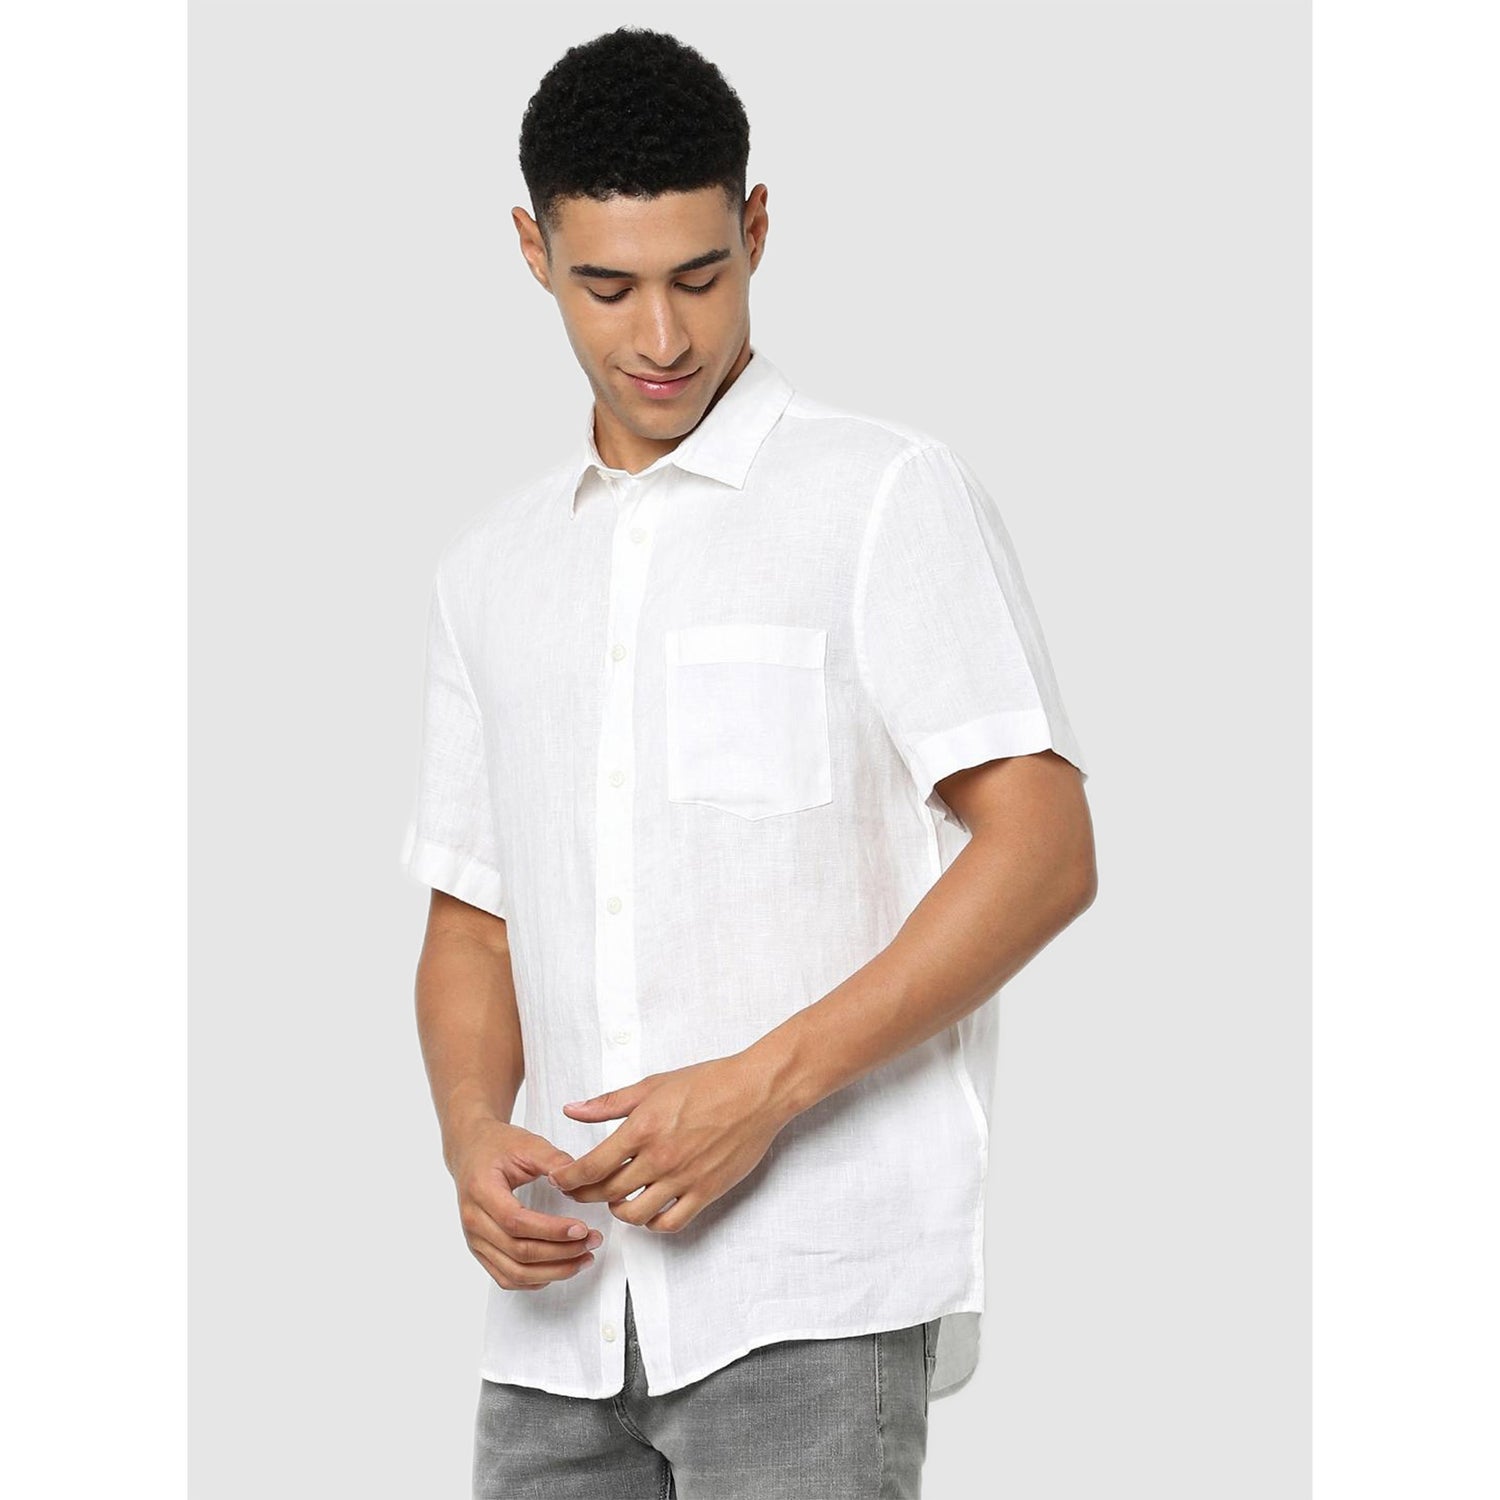 White Solid Regular Fit Classic Linen Casual Shirt (BAMACAR)